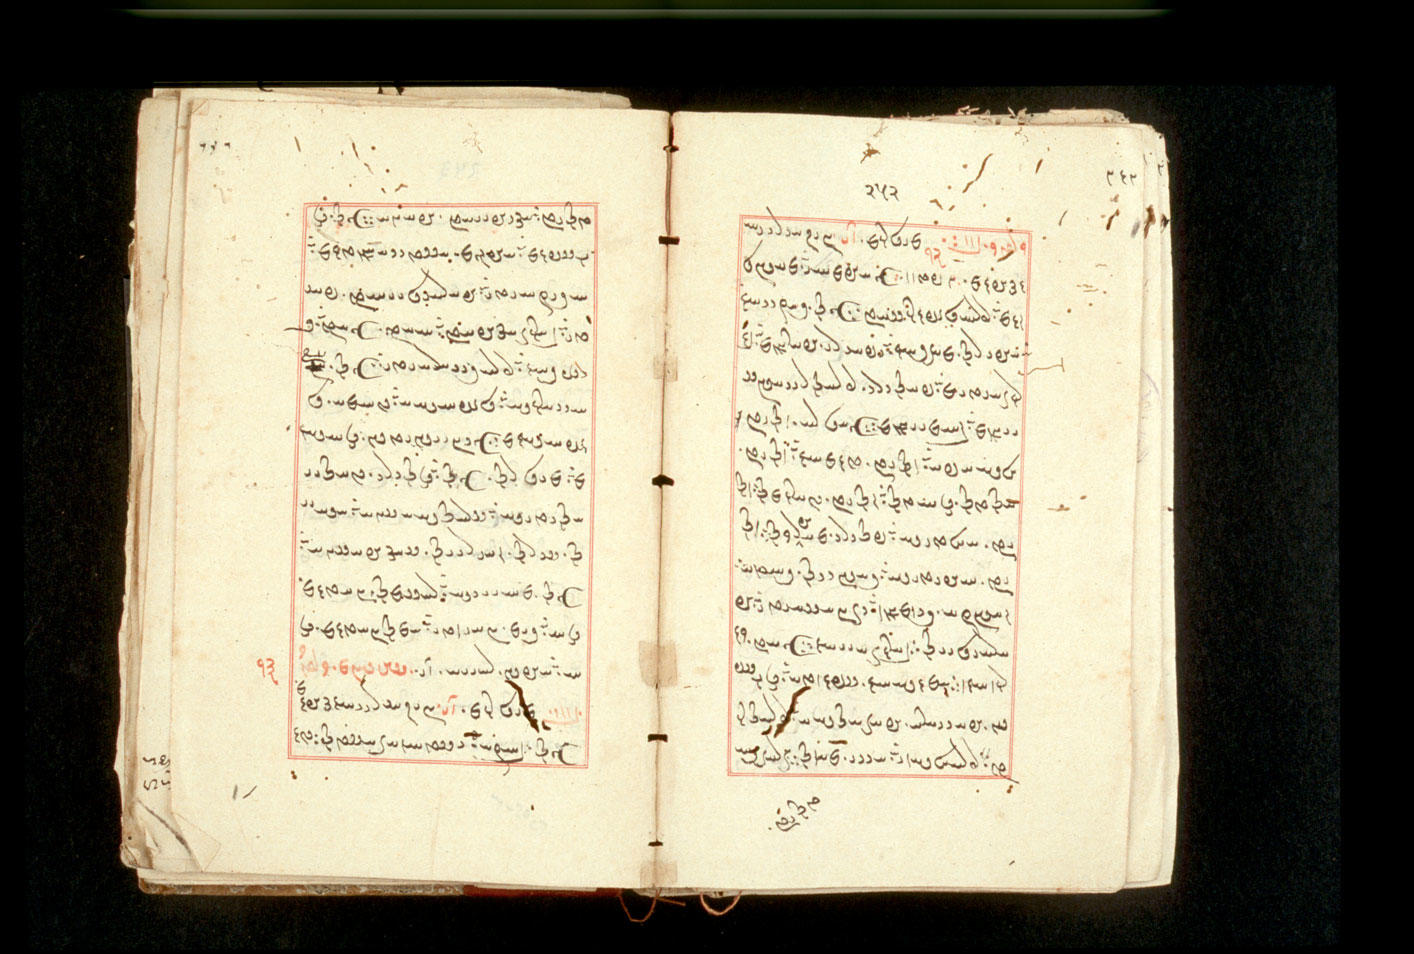 Folios 252v (right) and 253r (left)